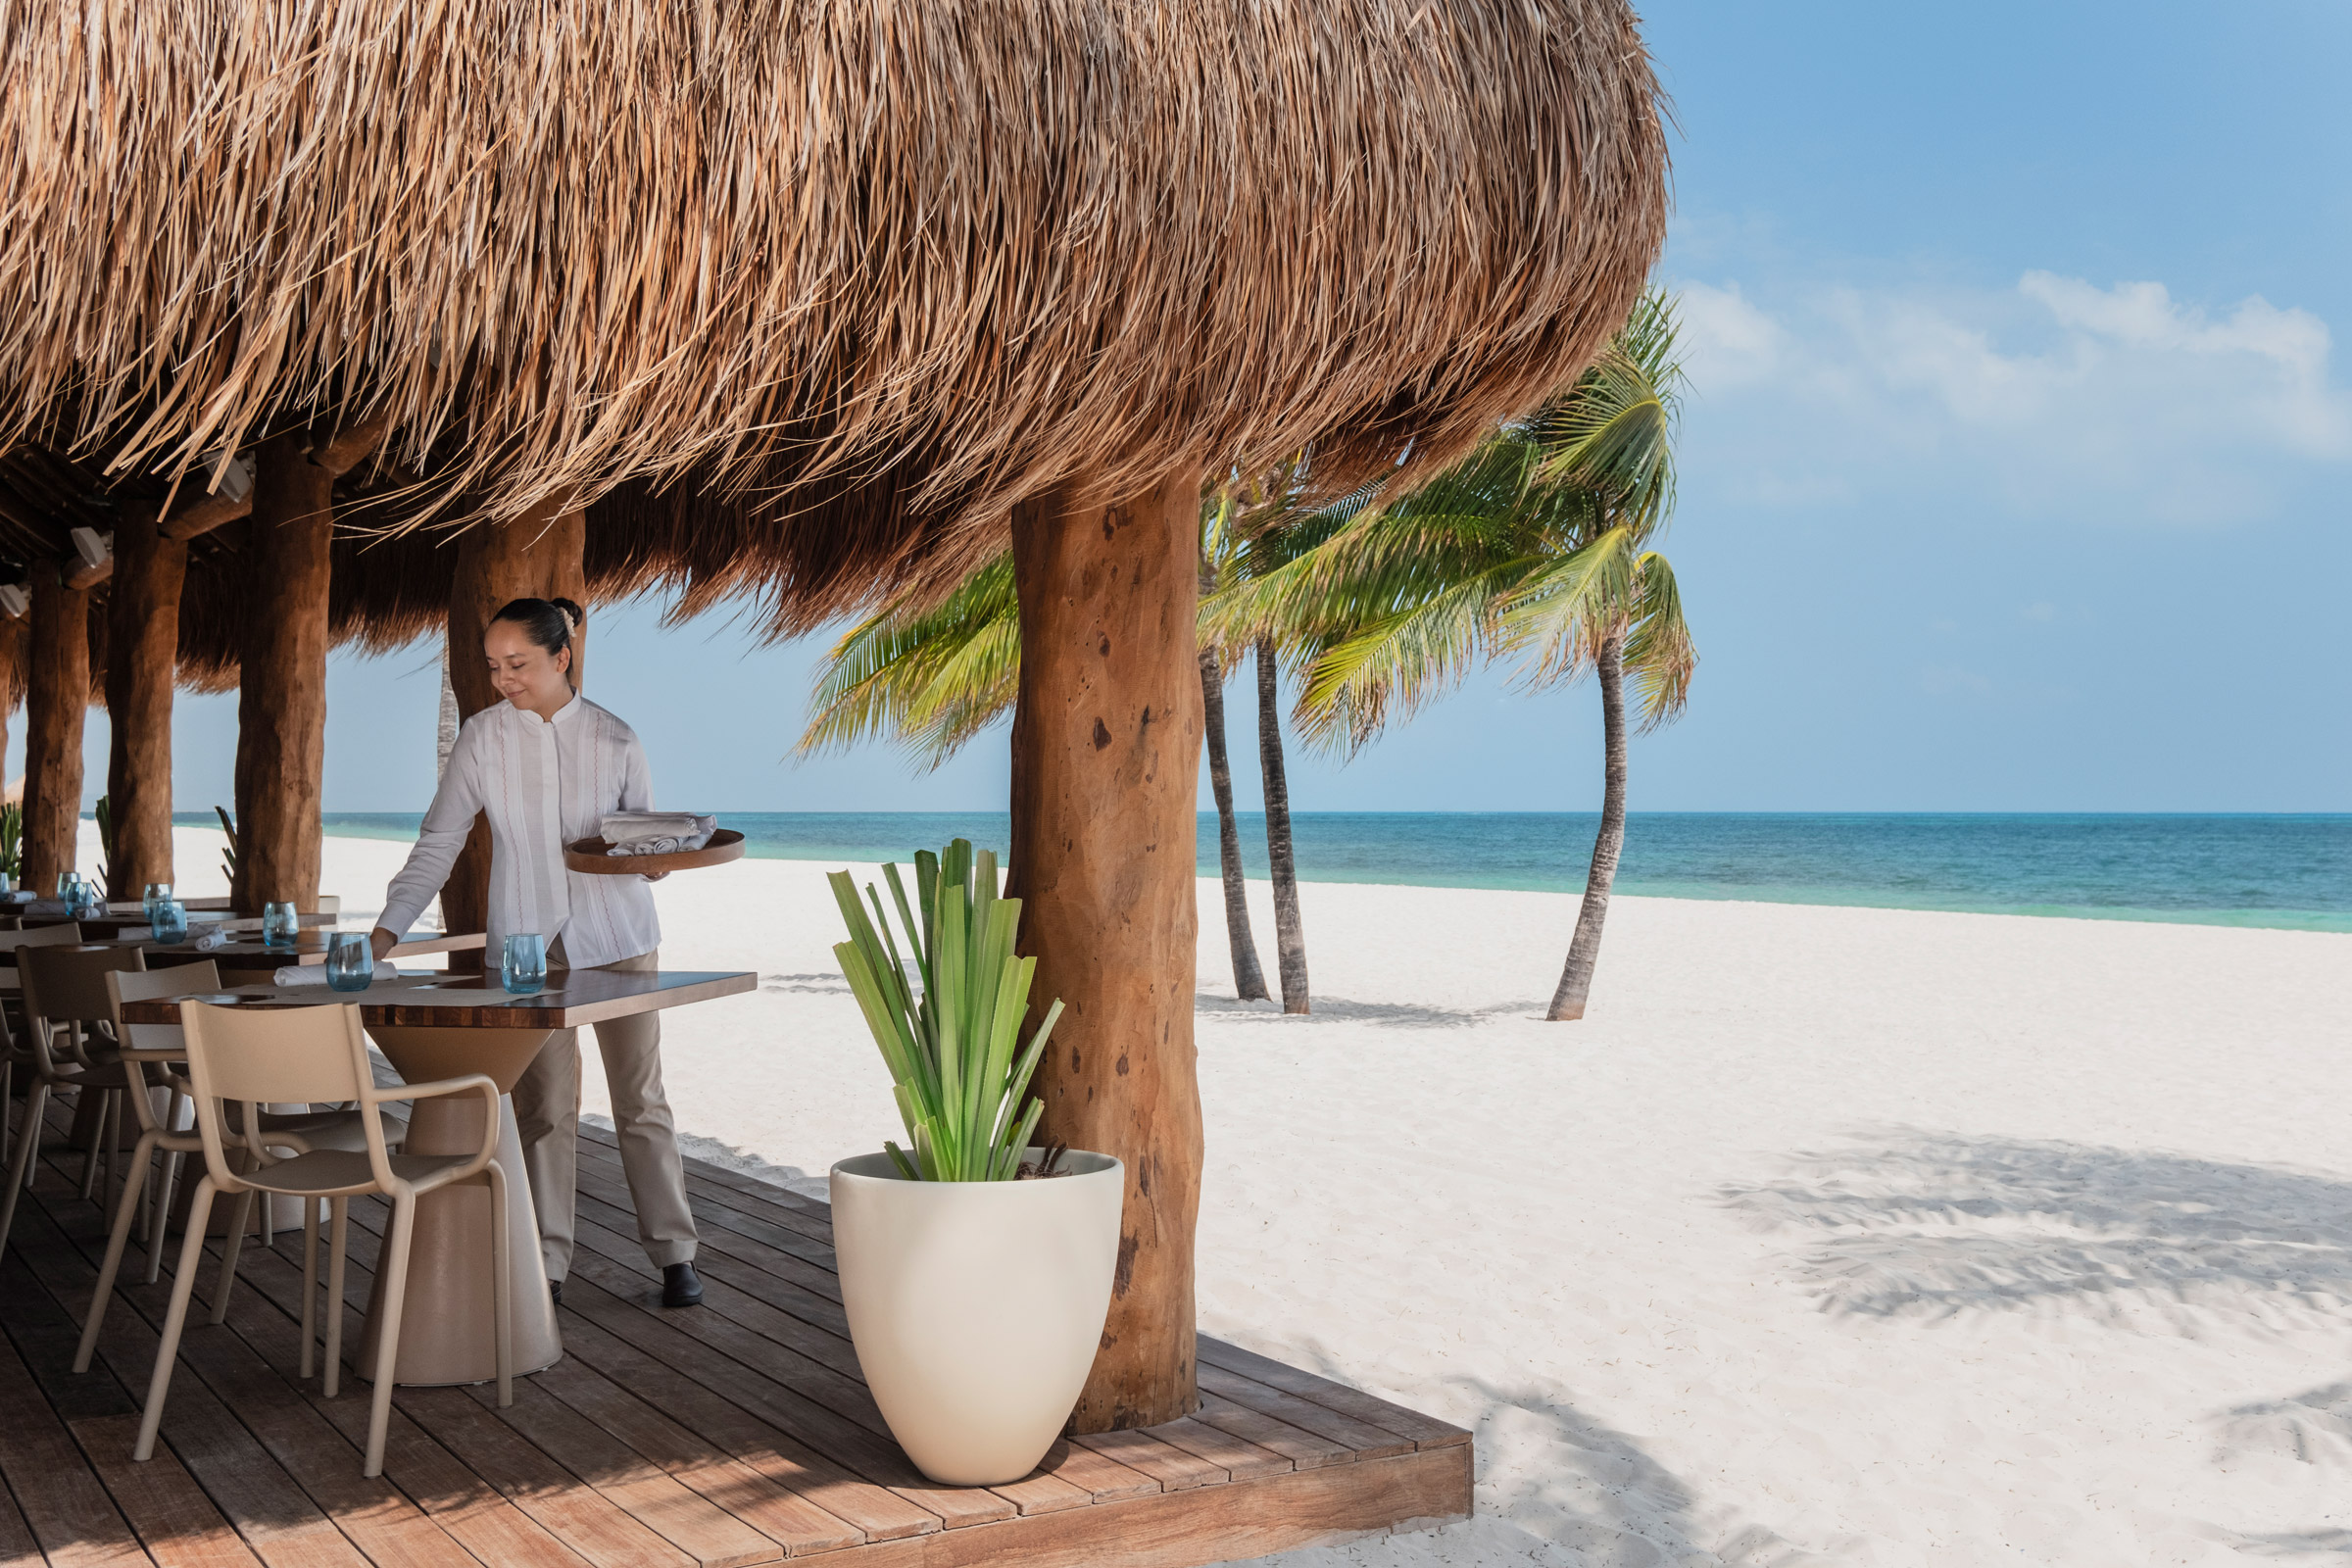 Enjoy service by the sands in Cancun